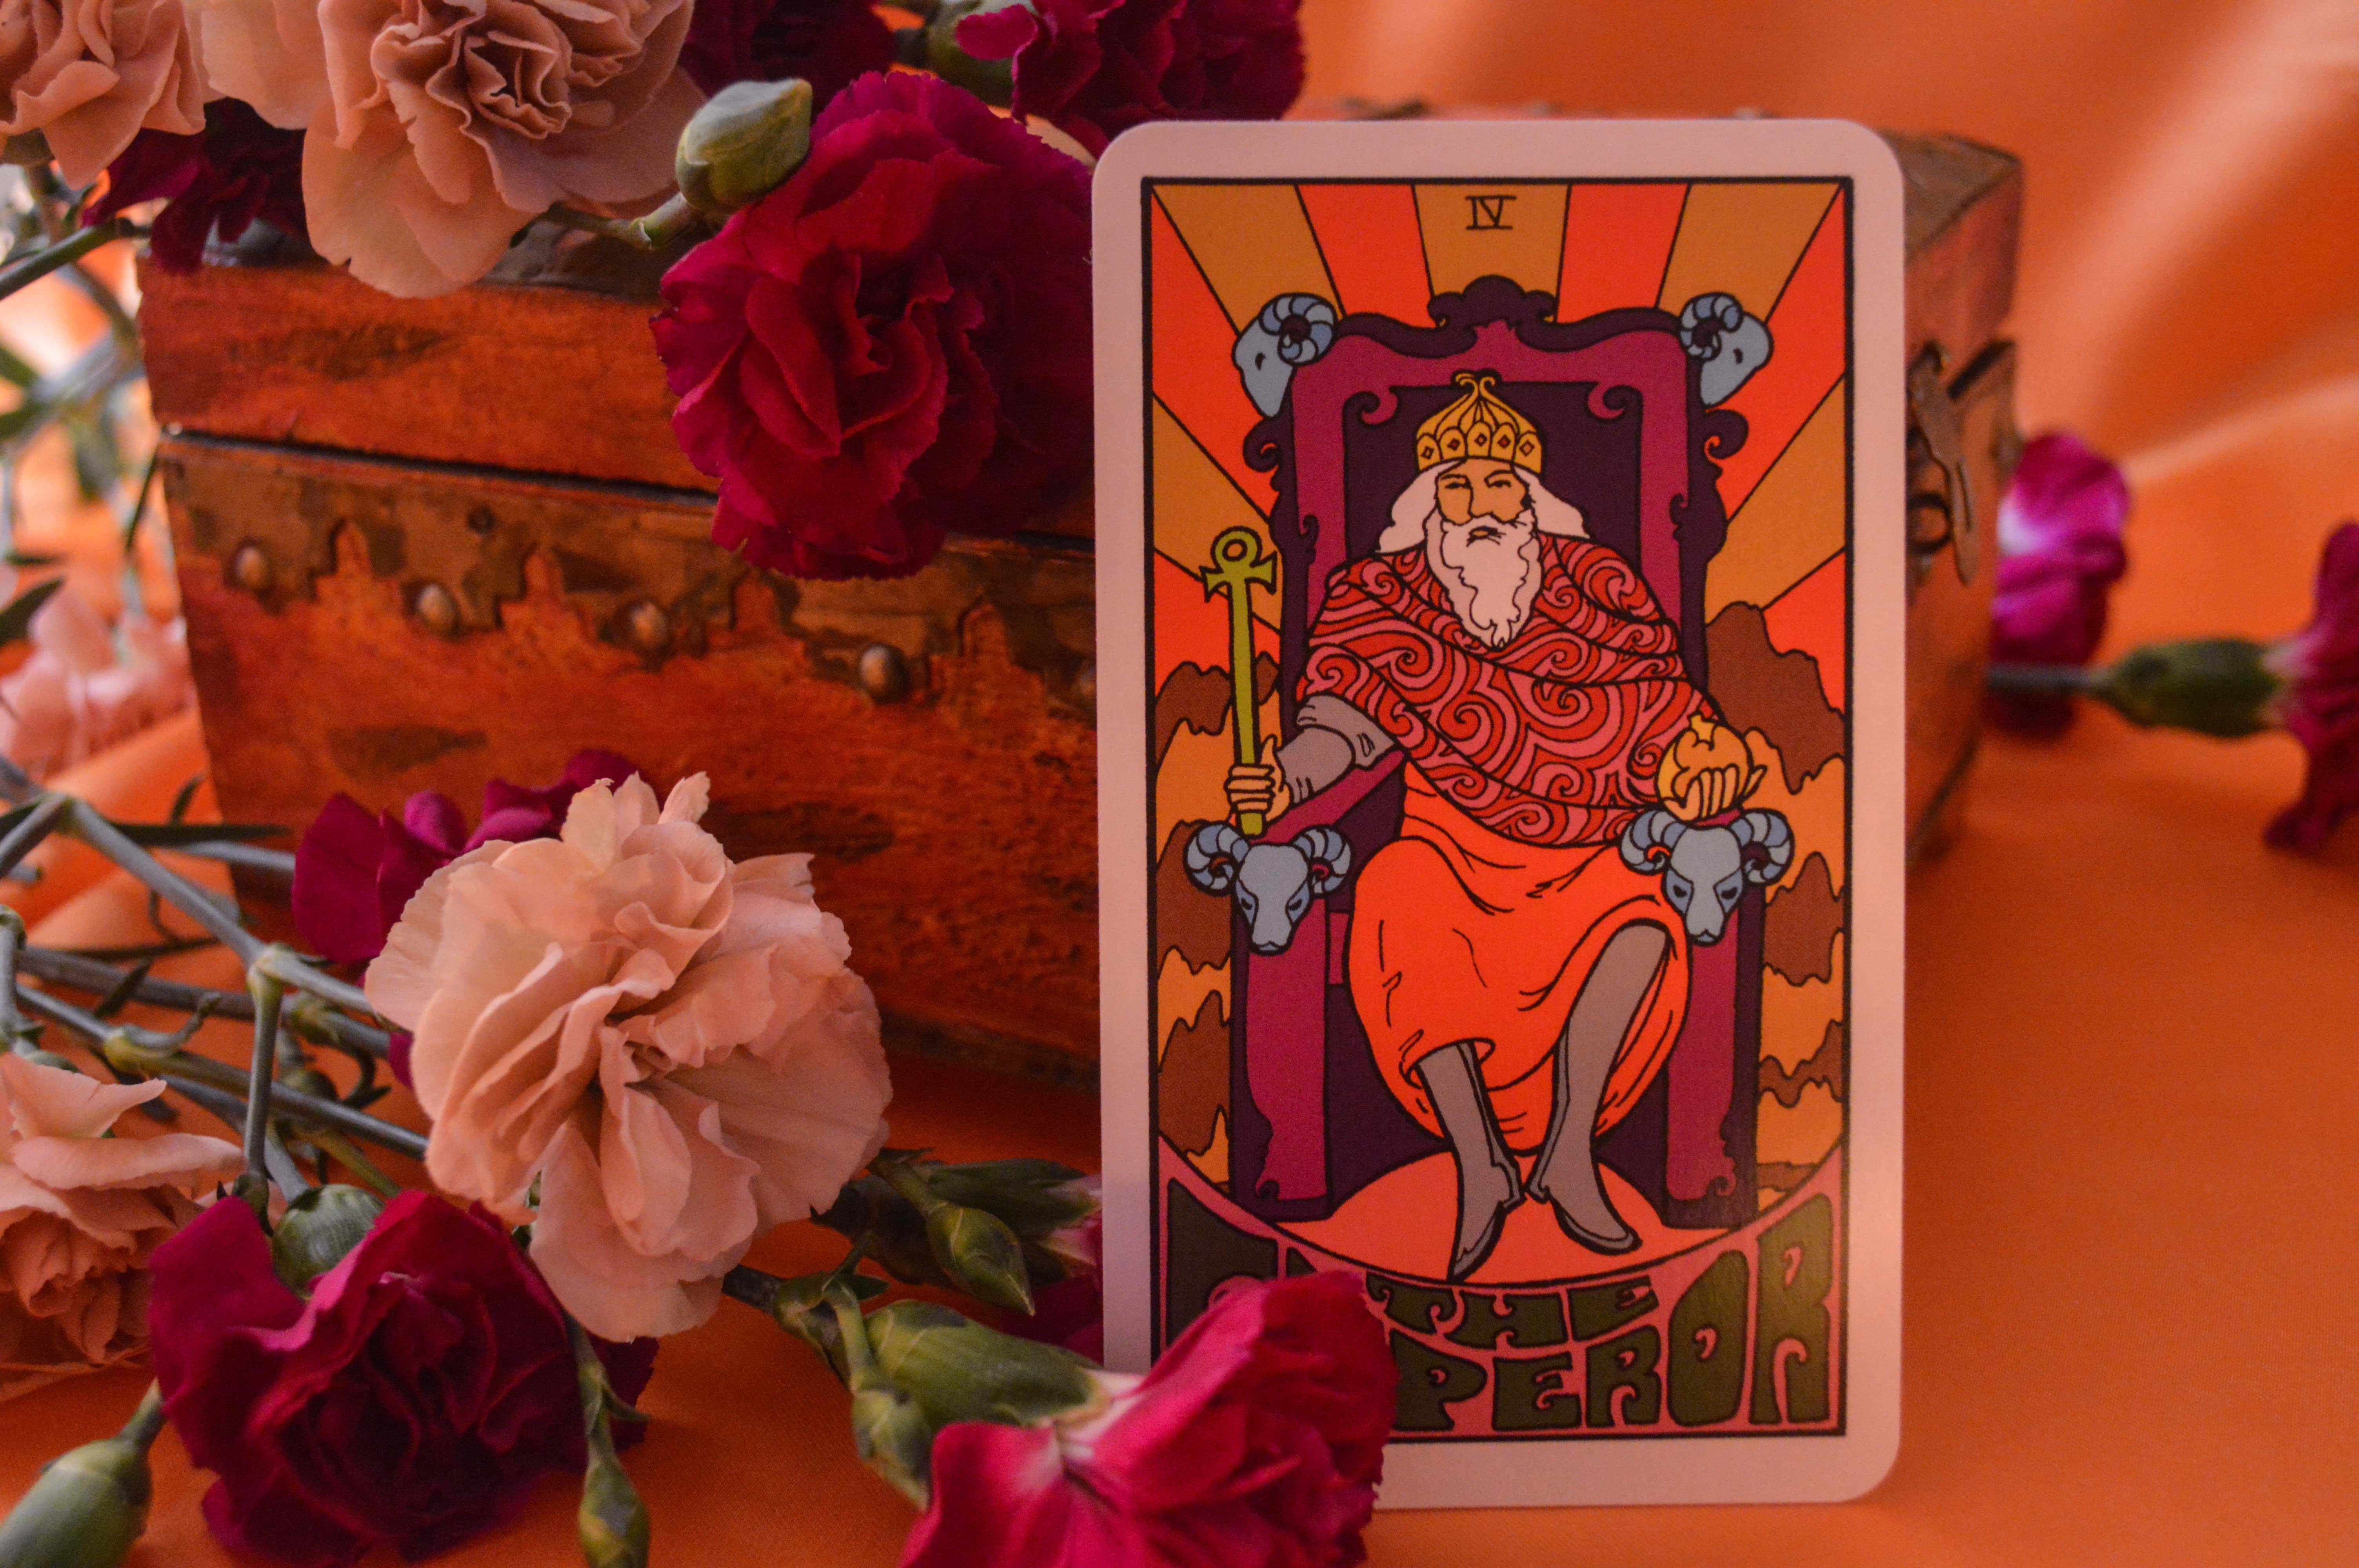 ARIES POWER CARD The Emperor: Create your own destiny. Be aware of your own power and strength; wield it wisely. Aries is also associated with the Queen of Wands: Courage, confidence, independence. You are in charge. From the Aquarius deck by Dawn Aquarius.